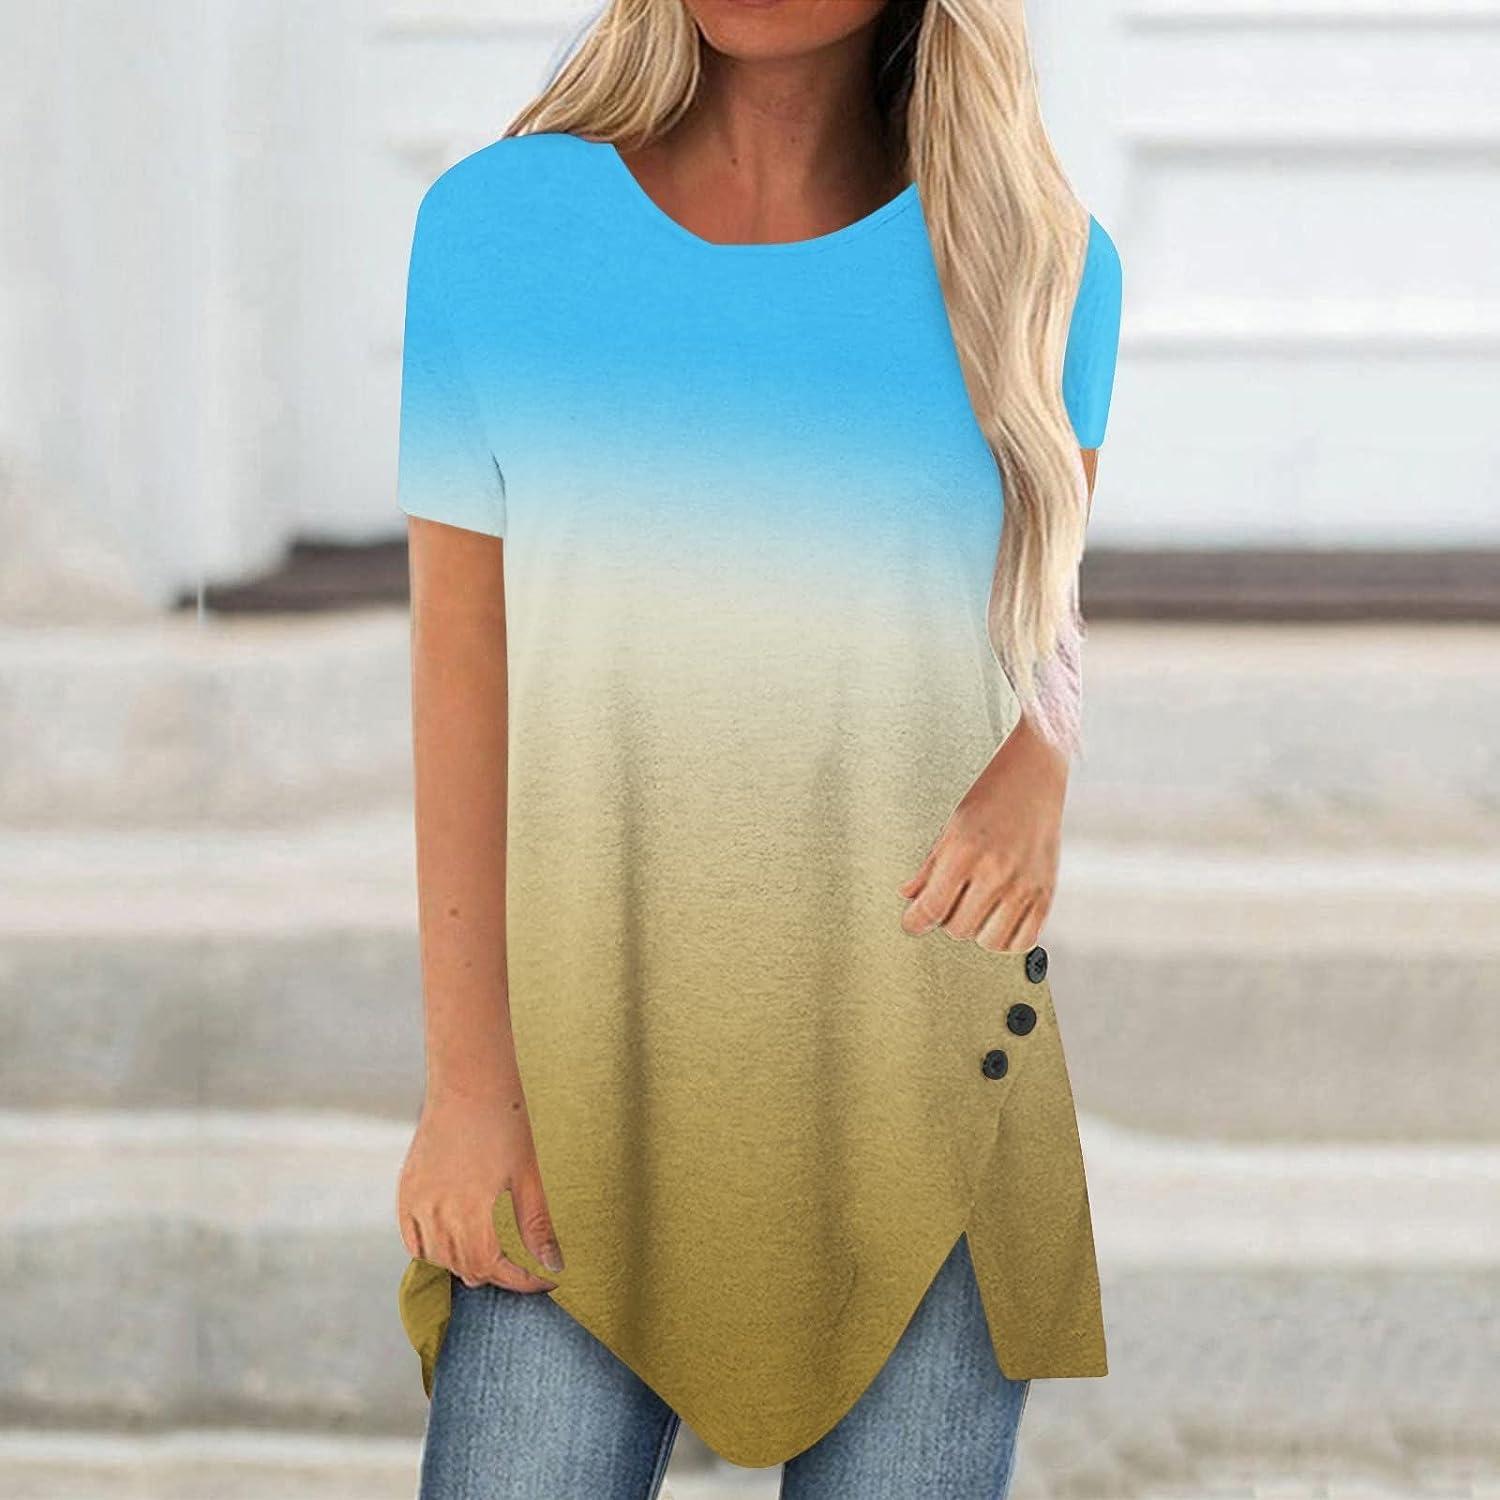 Plus Size Tunic Tops for Women Plus Size Short Sleeve Blouse with Pocket V  Neck Going Out Shirts Cute Summer Clothes 3X-Large Yellow Tunic Tops  Warehouse Clearance Sale